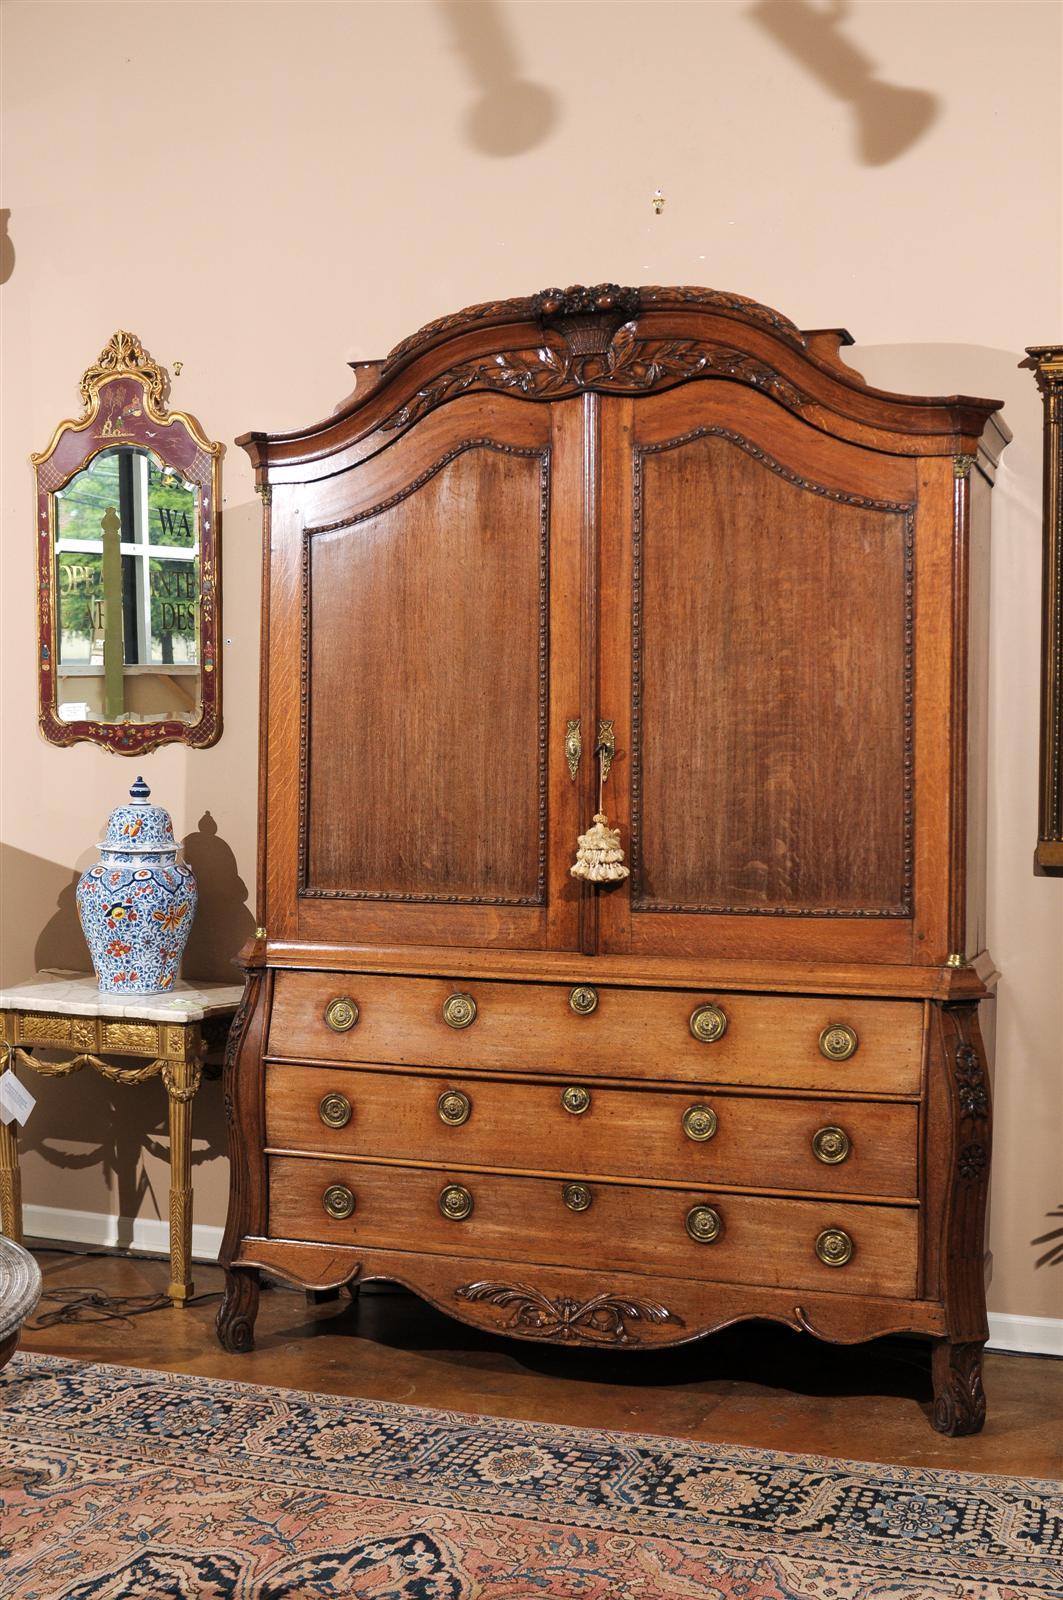 This is a magnificent 18th century "Dutch Kabinet" the Dutch were known in this period to craft in the bombe style. This piece was used to store a mixture of china and linens. There is a large cupboard that and a set of three large bottom